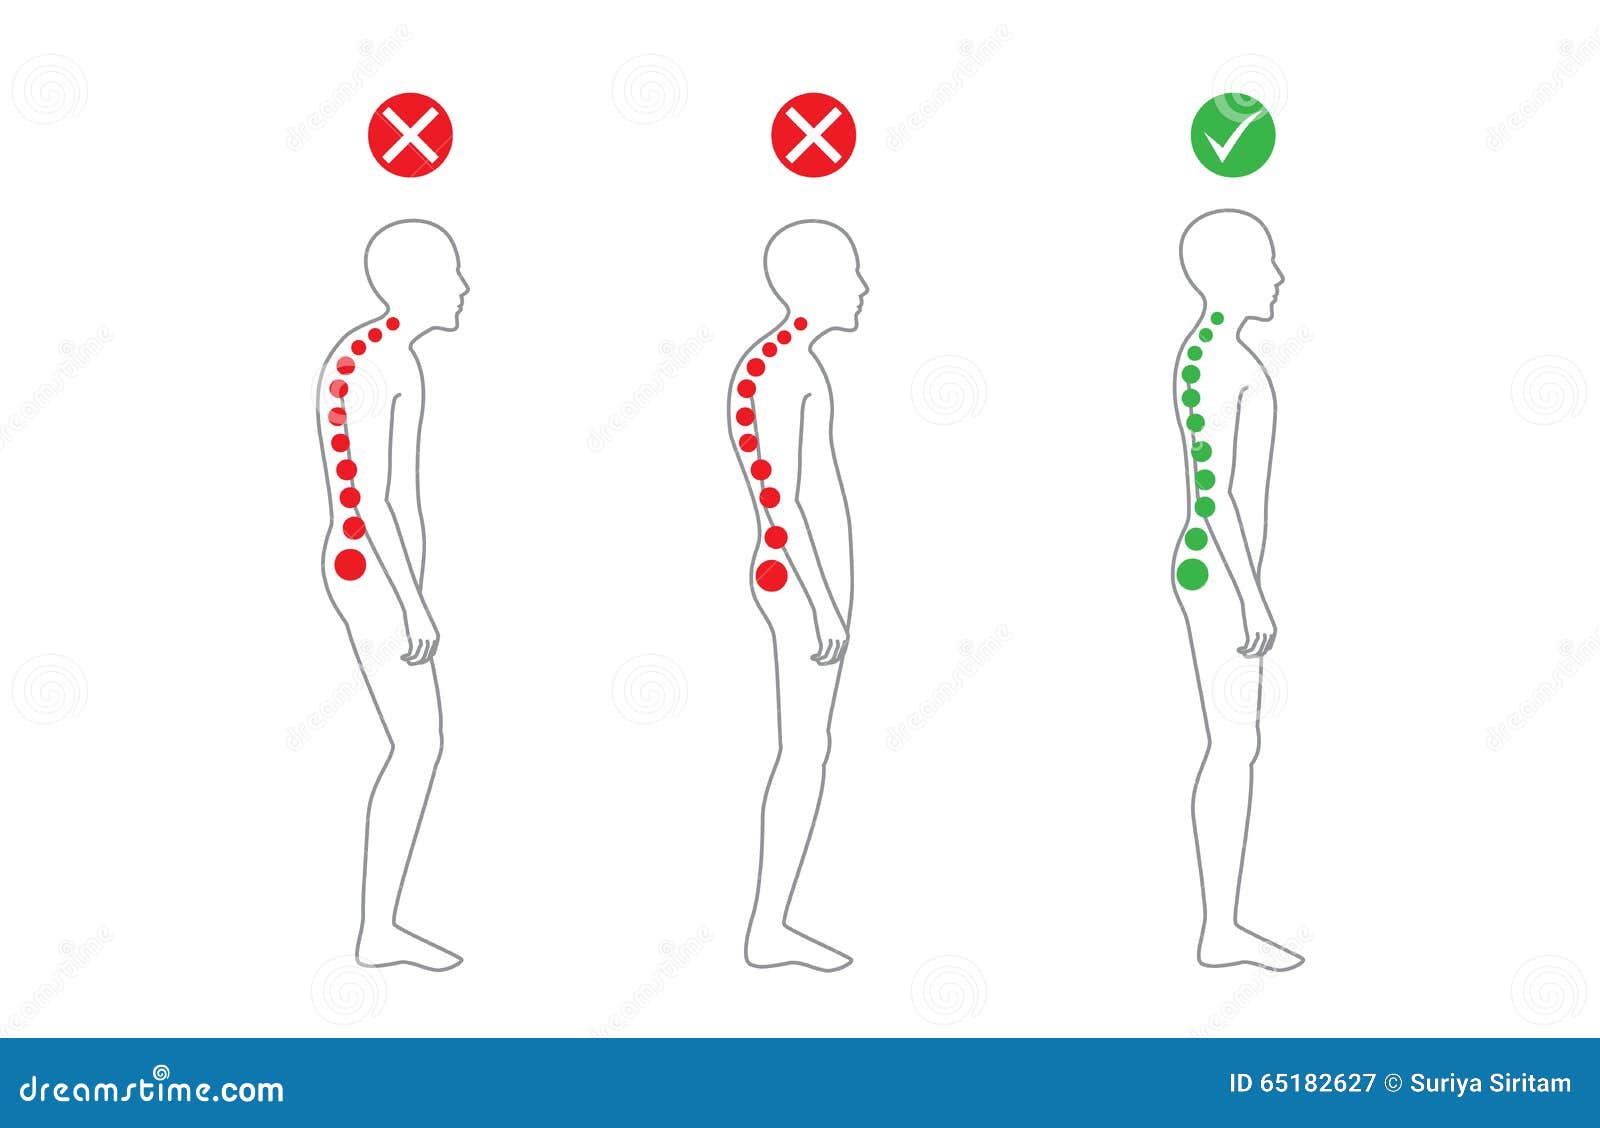 correct alignment of body in standing posture